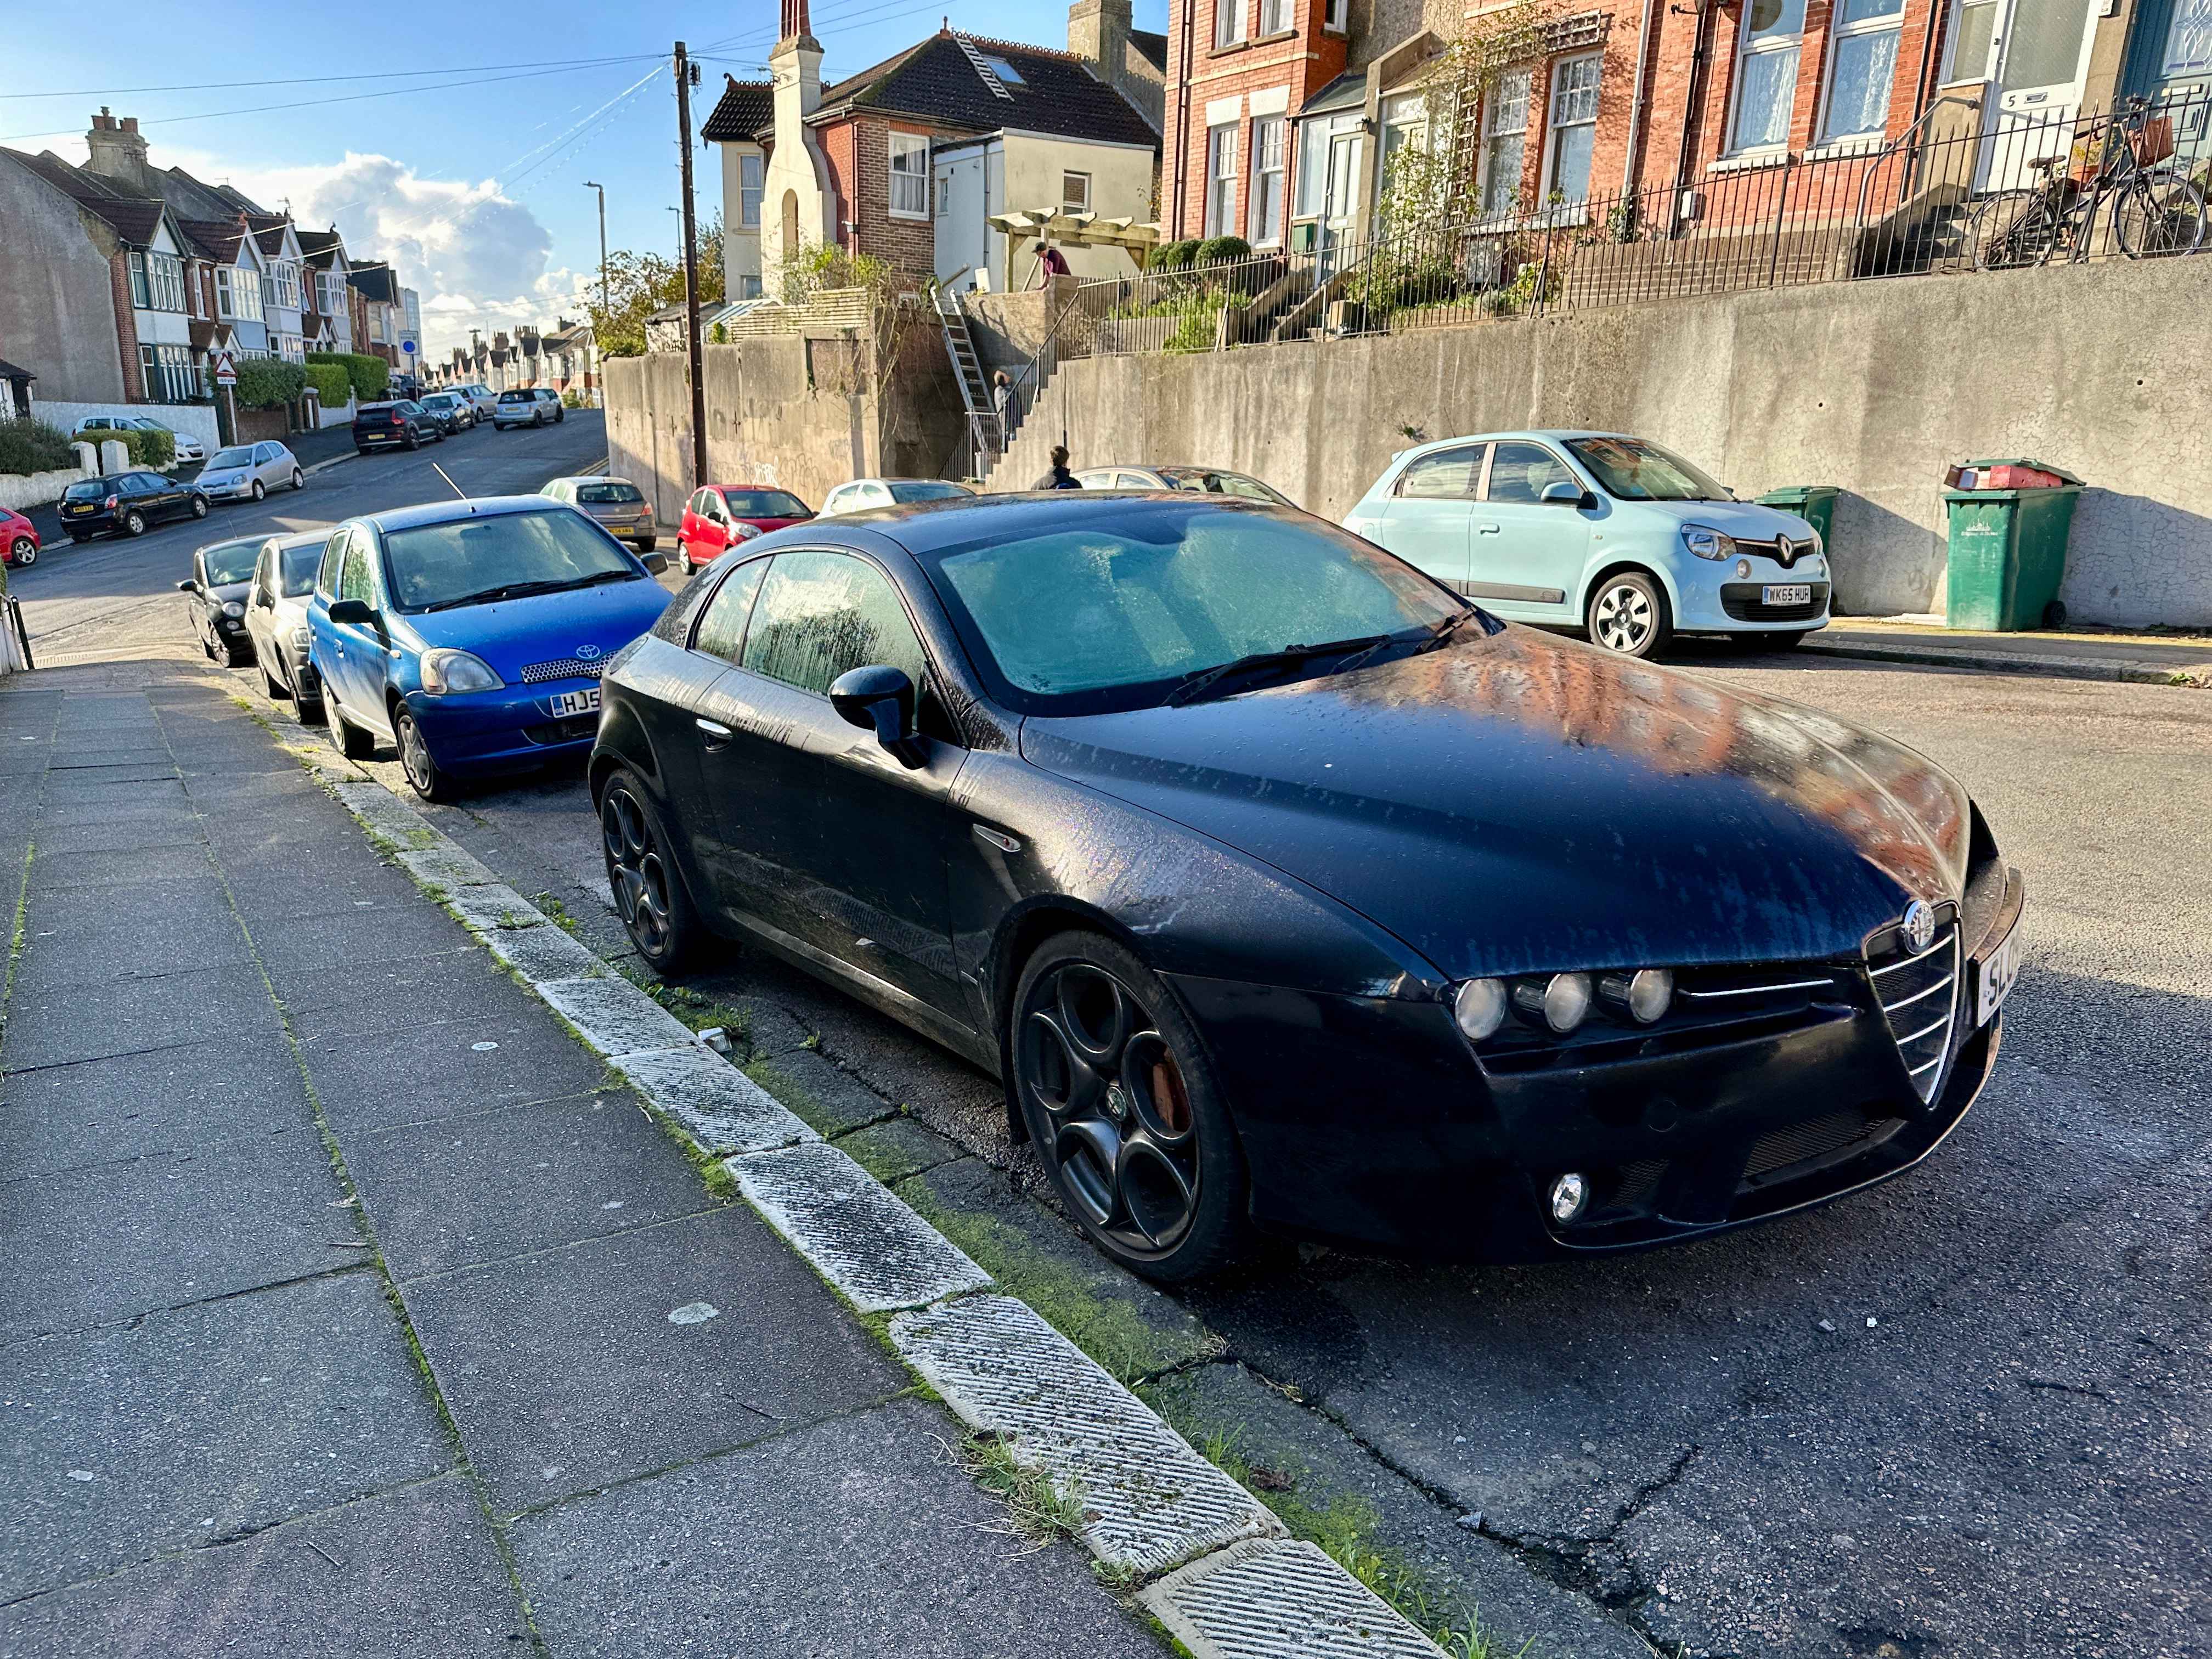 Photograph of SL09 WUB - a Black Alfa Romeo Brera parked in Hollingdean by a non-resident. The eleventh of twenty photographs supplied by the residents of Hollingdean.